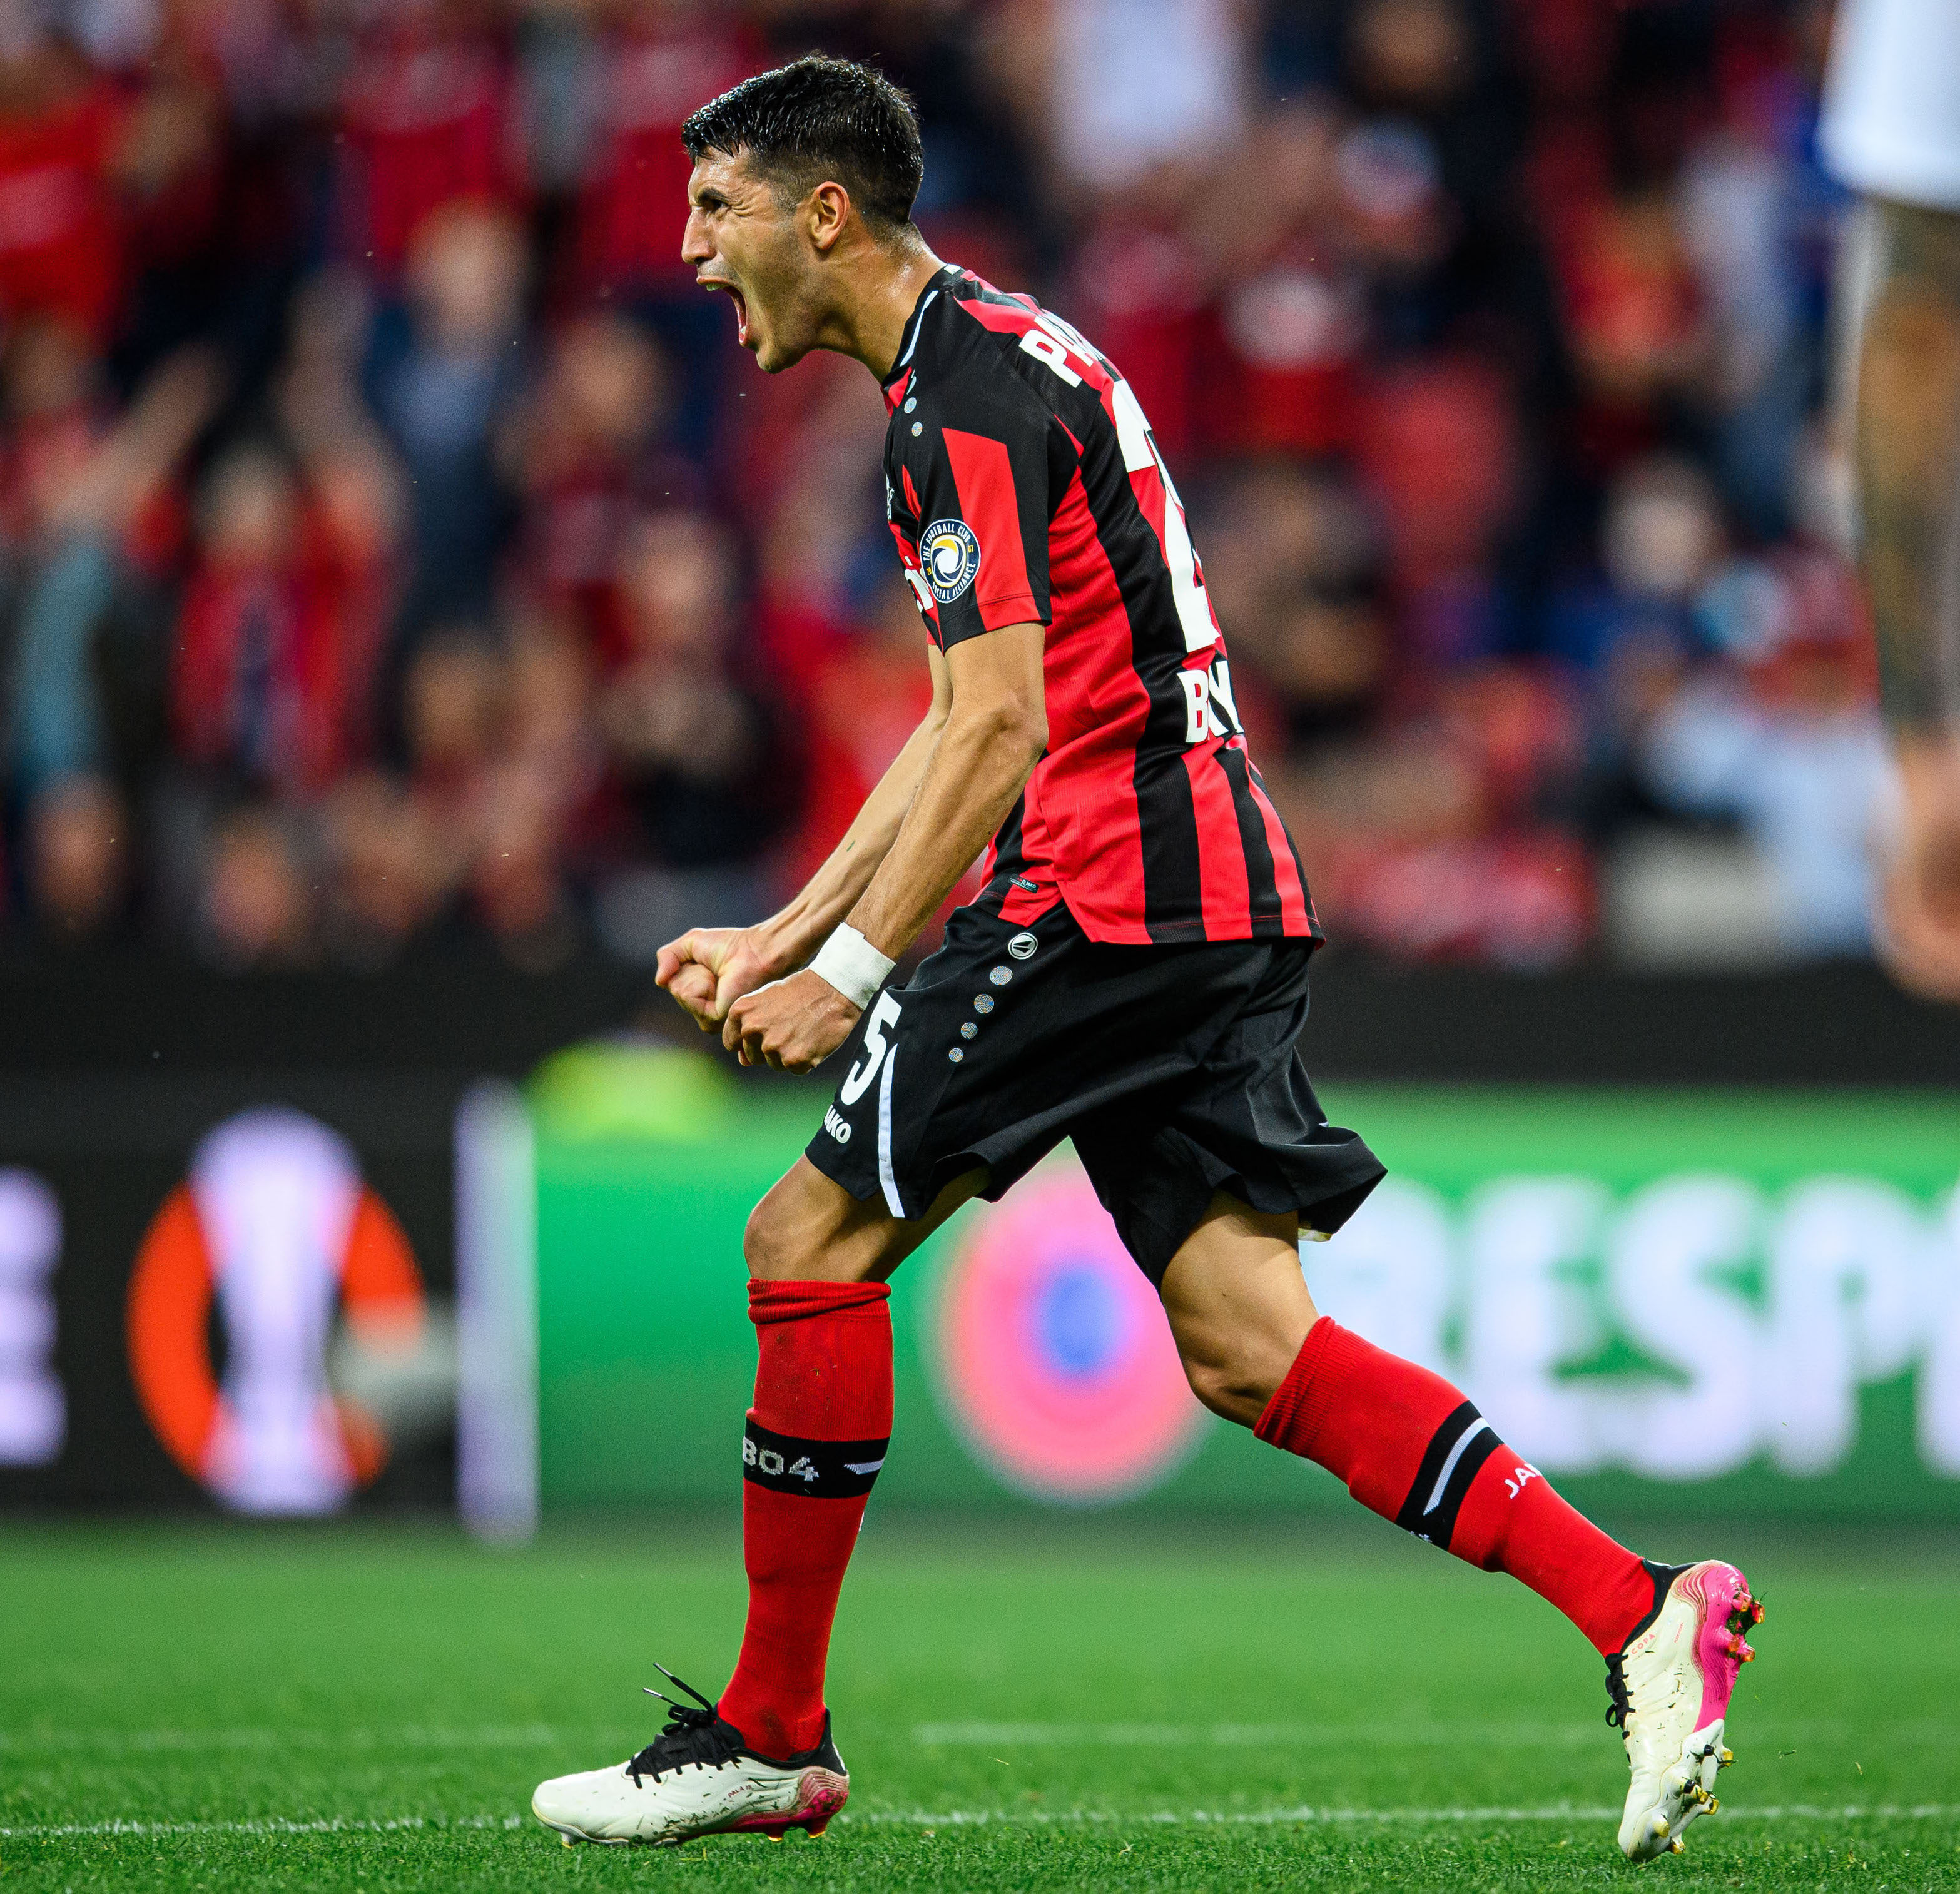 Bayer 04 Leverkusen on X: "🥳🎂 We're wishing Exequiel Palacios a very  happy birthday today! https://t.co/V7RcnpVCJ4" / X